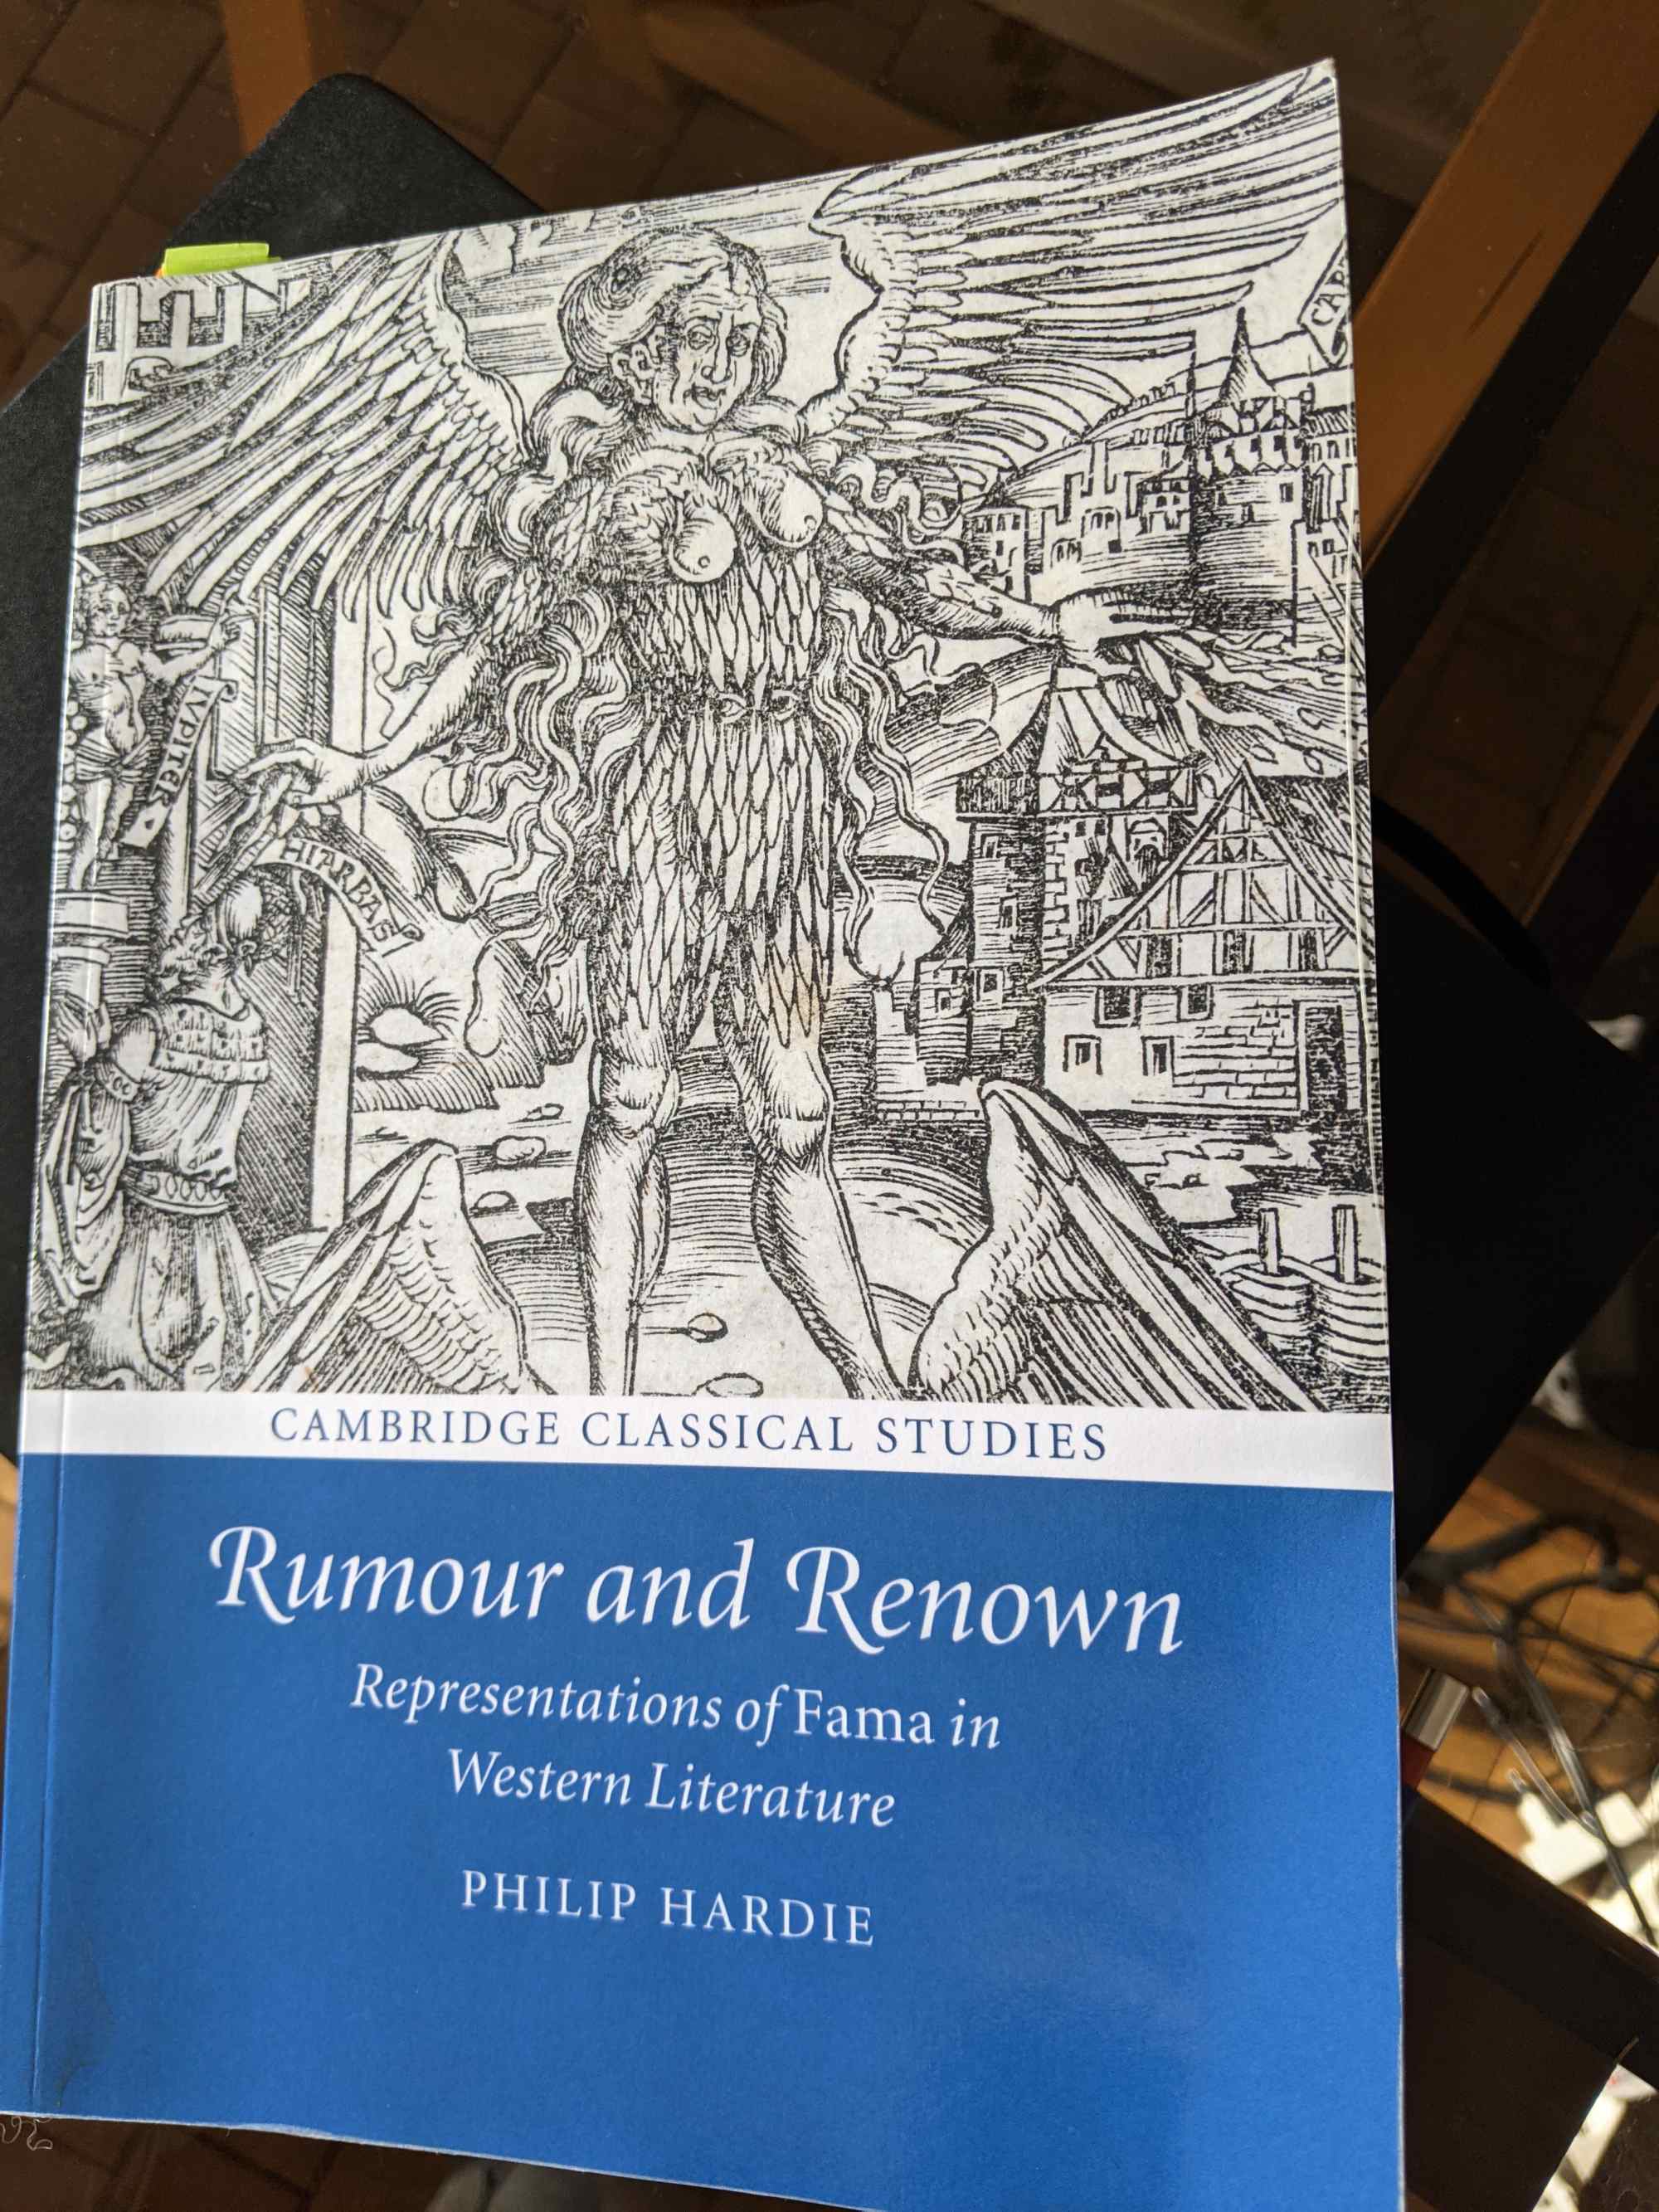 Rumour and Renown